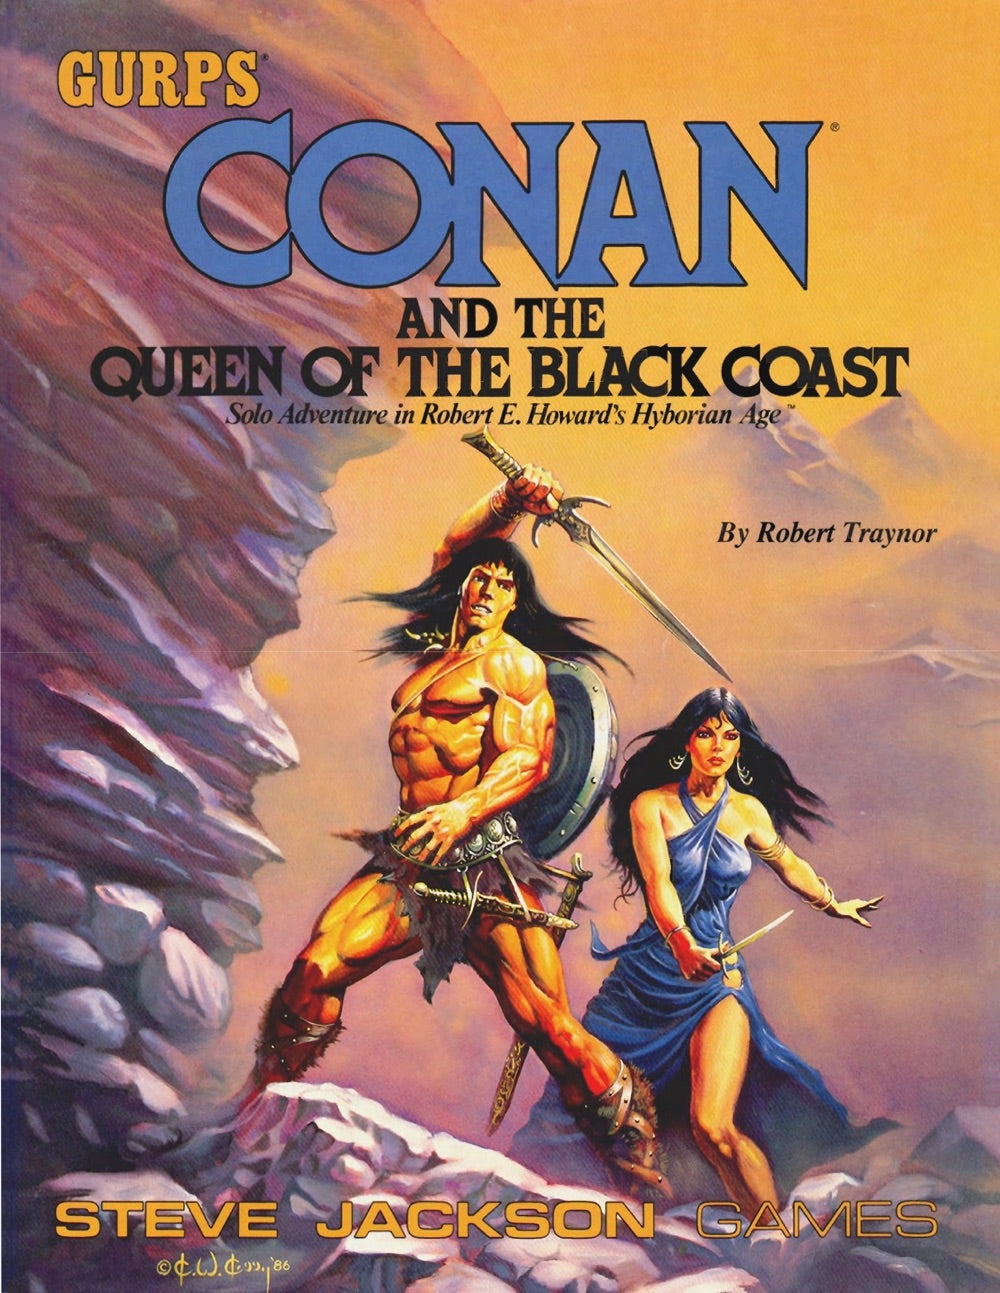 GURPS Classic: Conan and the Queen of the Black Coast